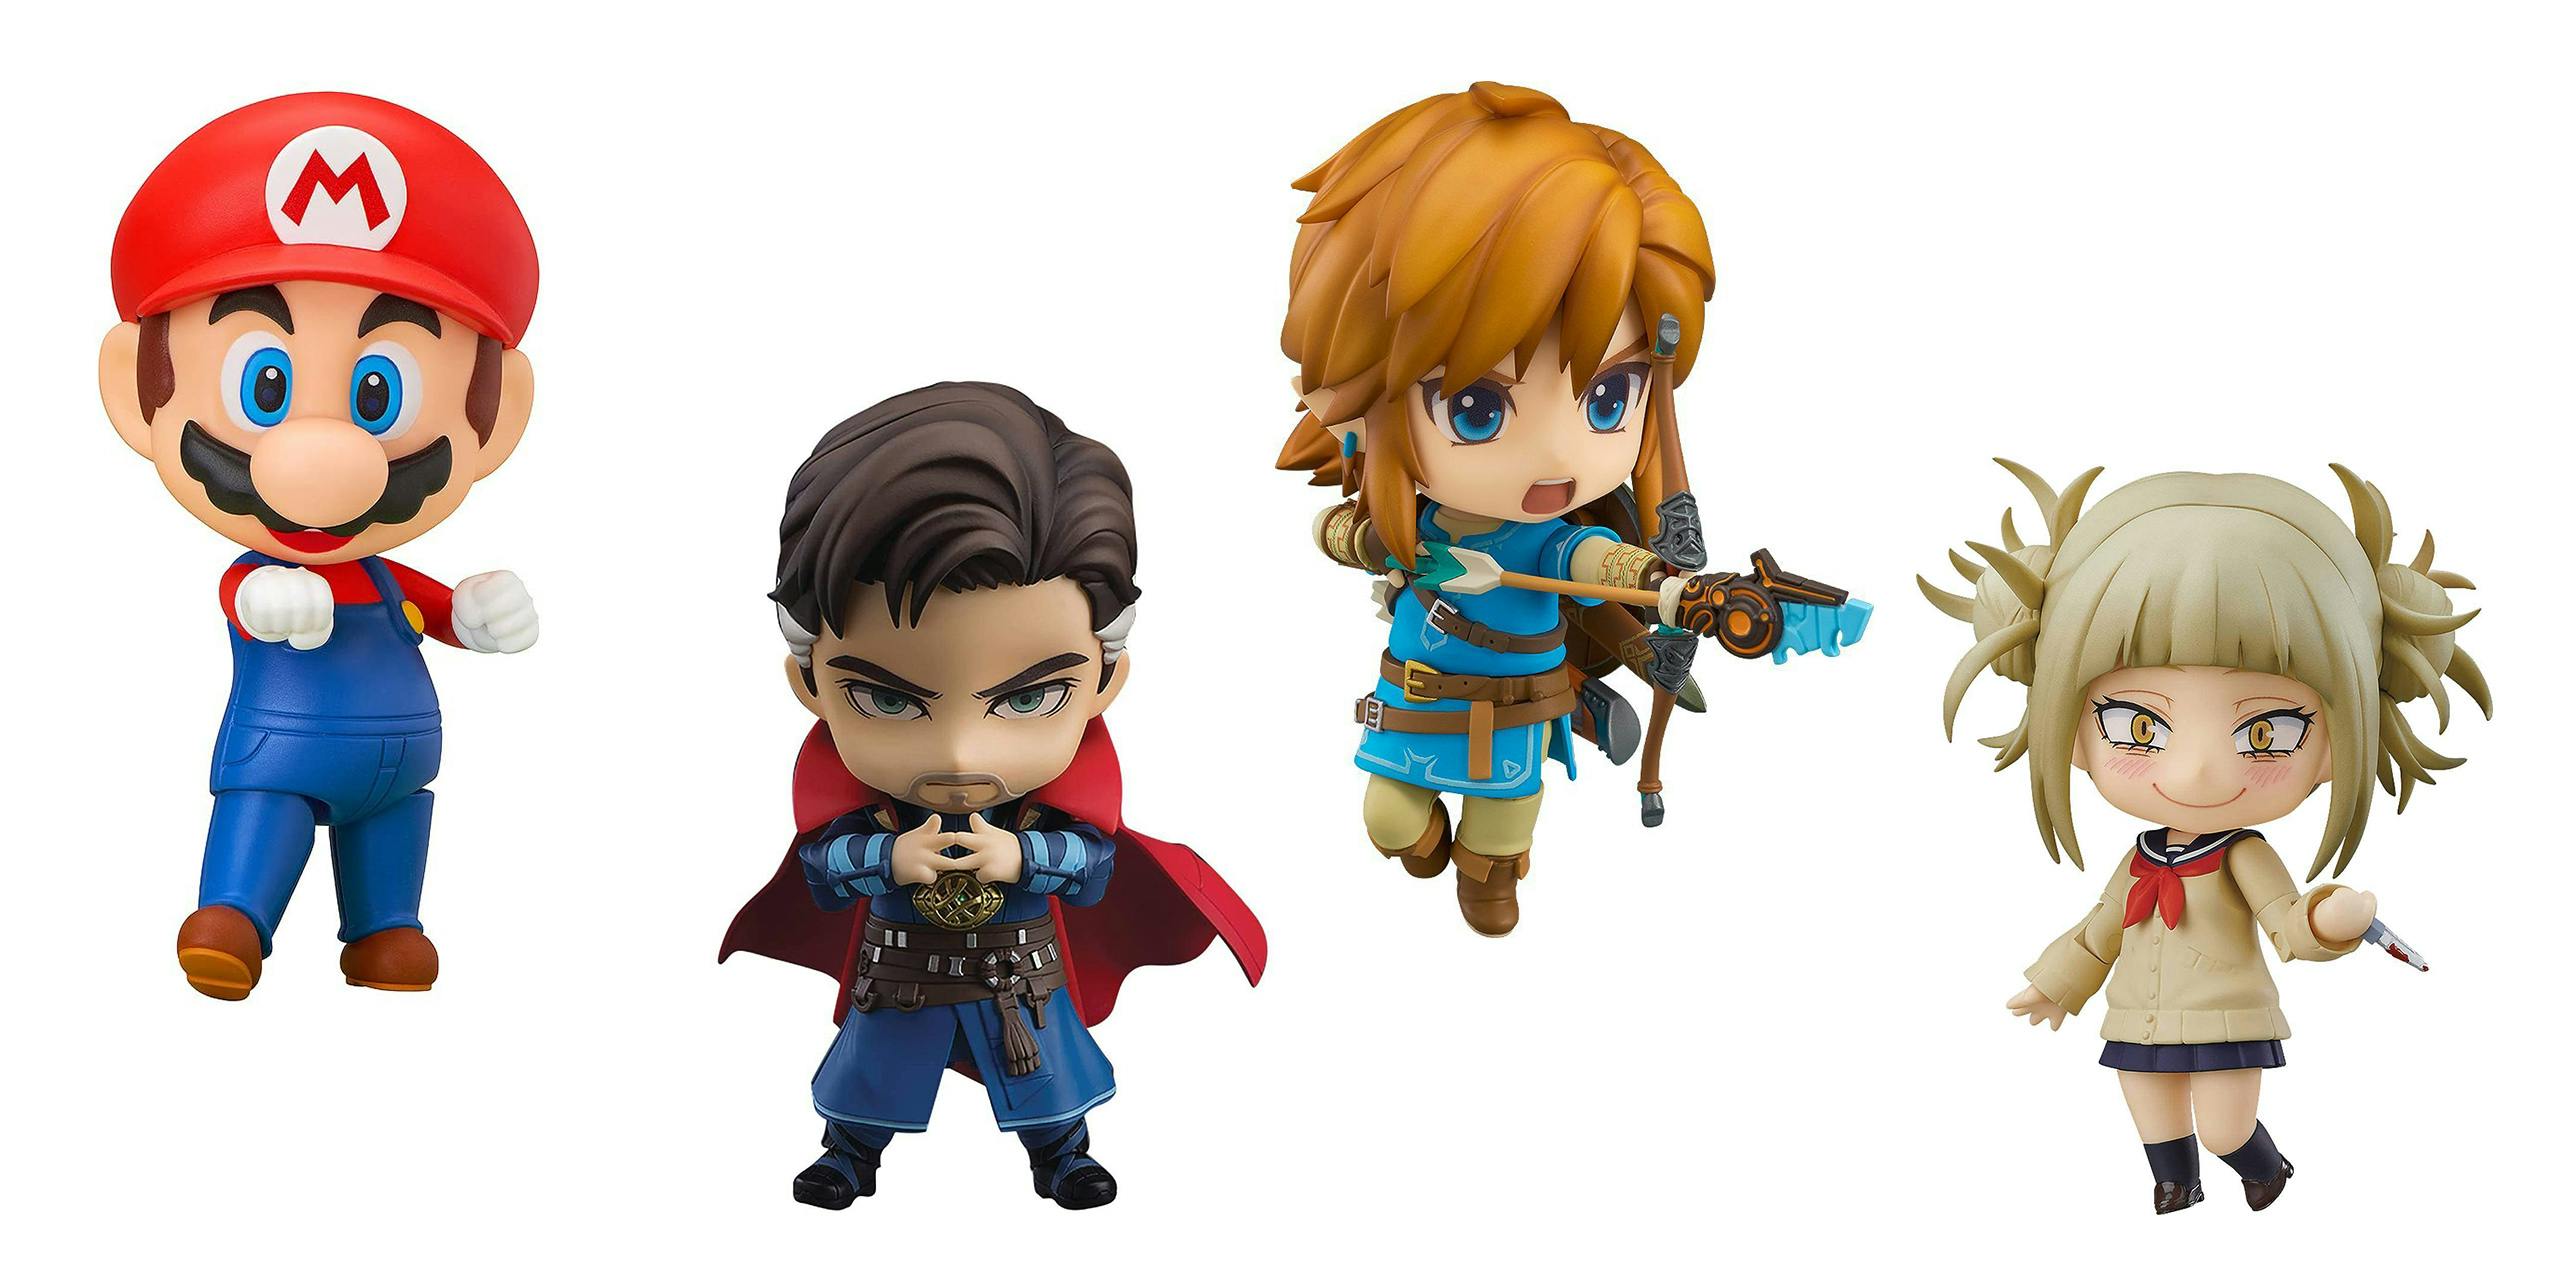 A selection of Nendoroids including Mario, Doctor Who, and Breath of the Wild Link.